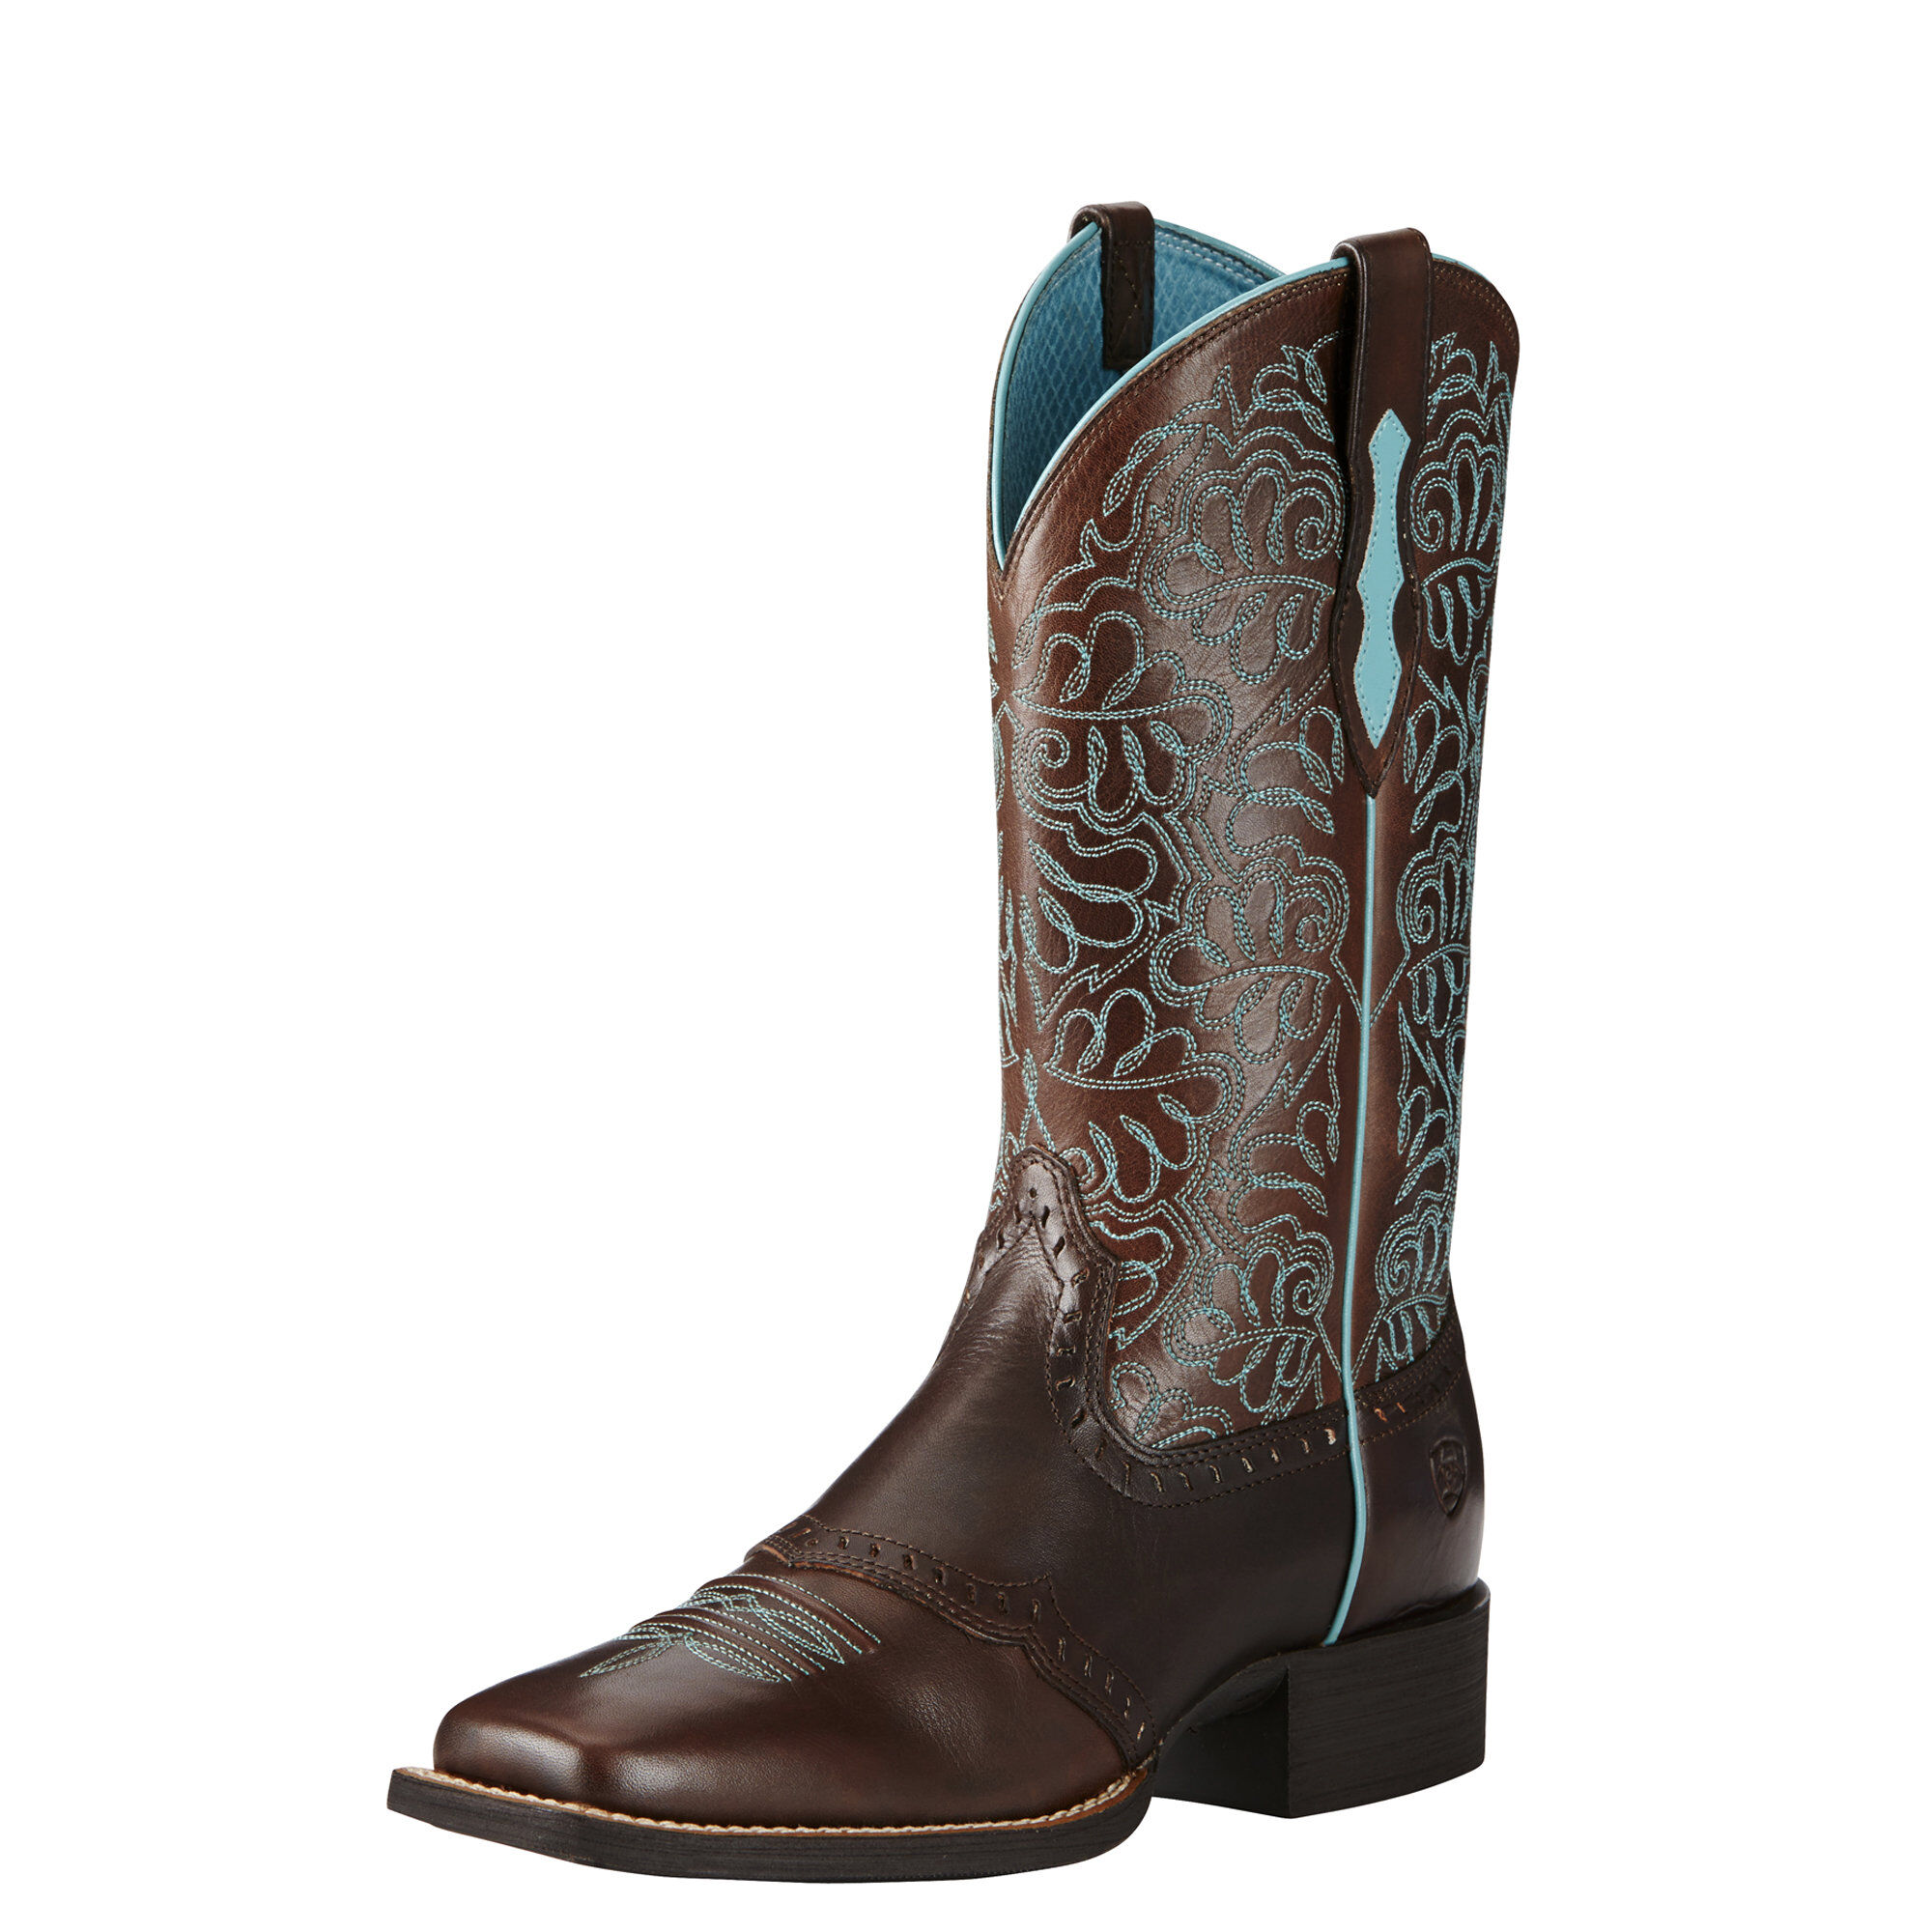 Women's Round Up Remuda Western Boots in Naturally Dark Brown Leather  by Ariat